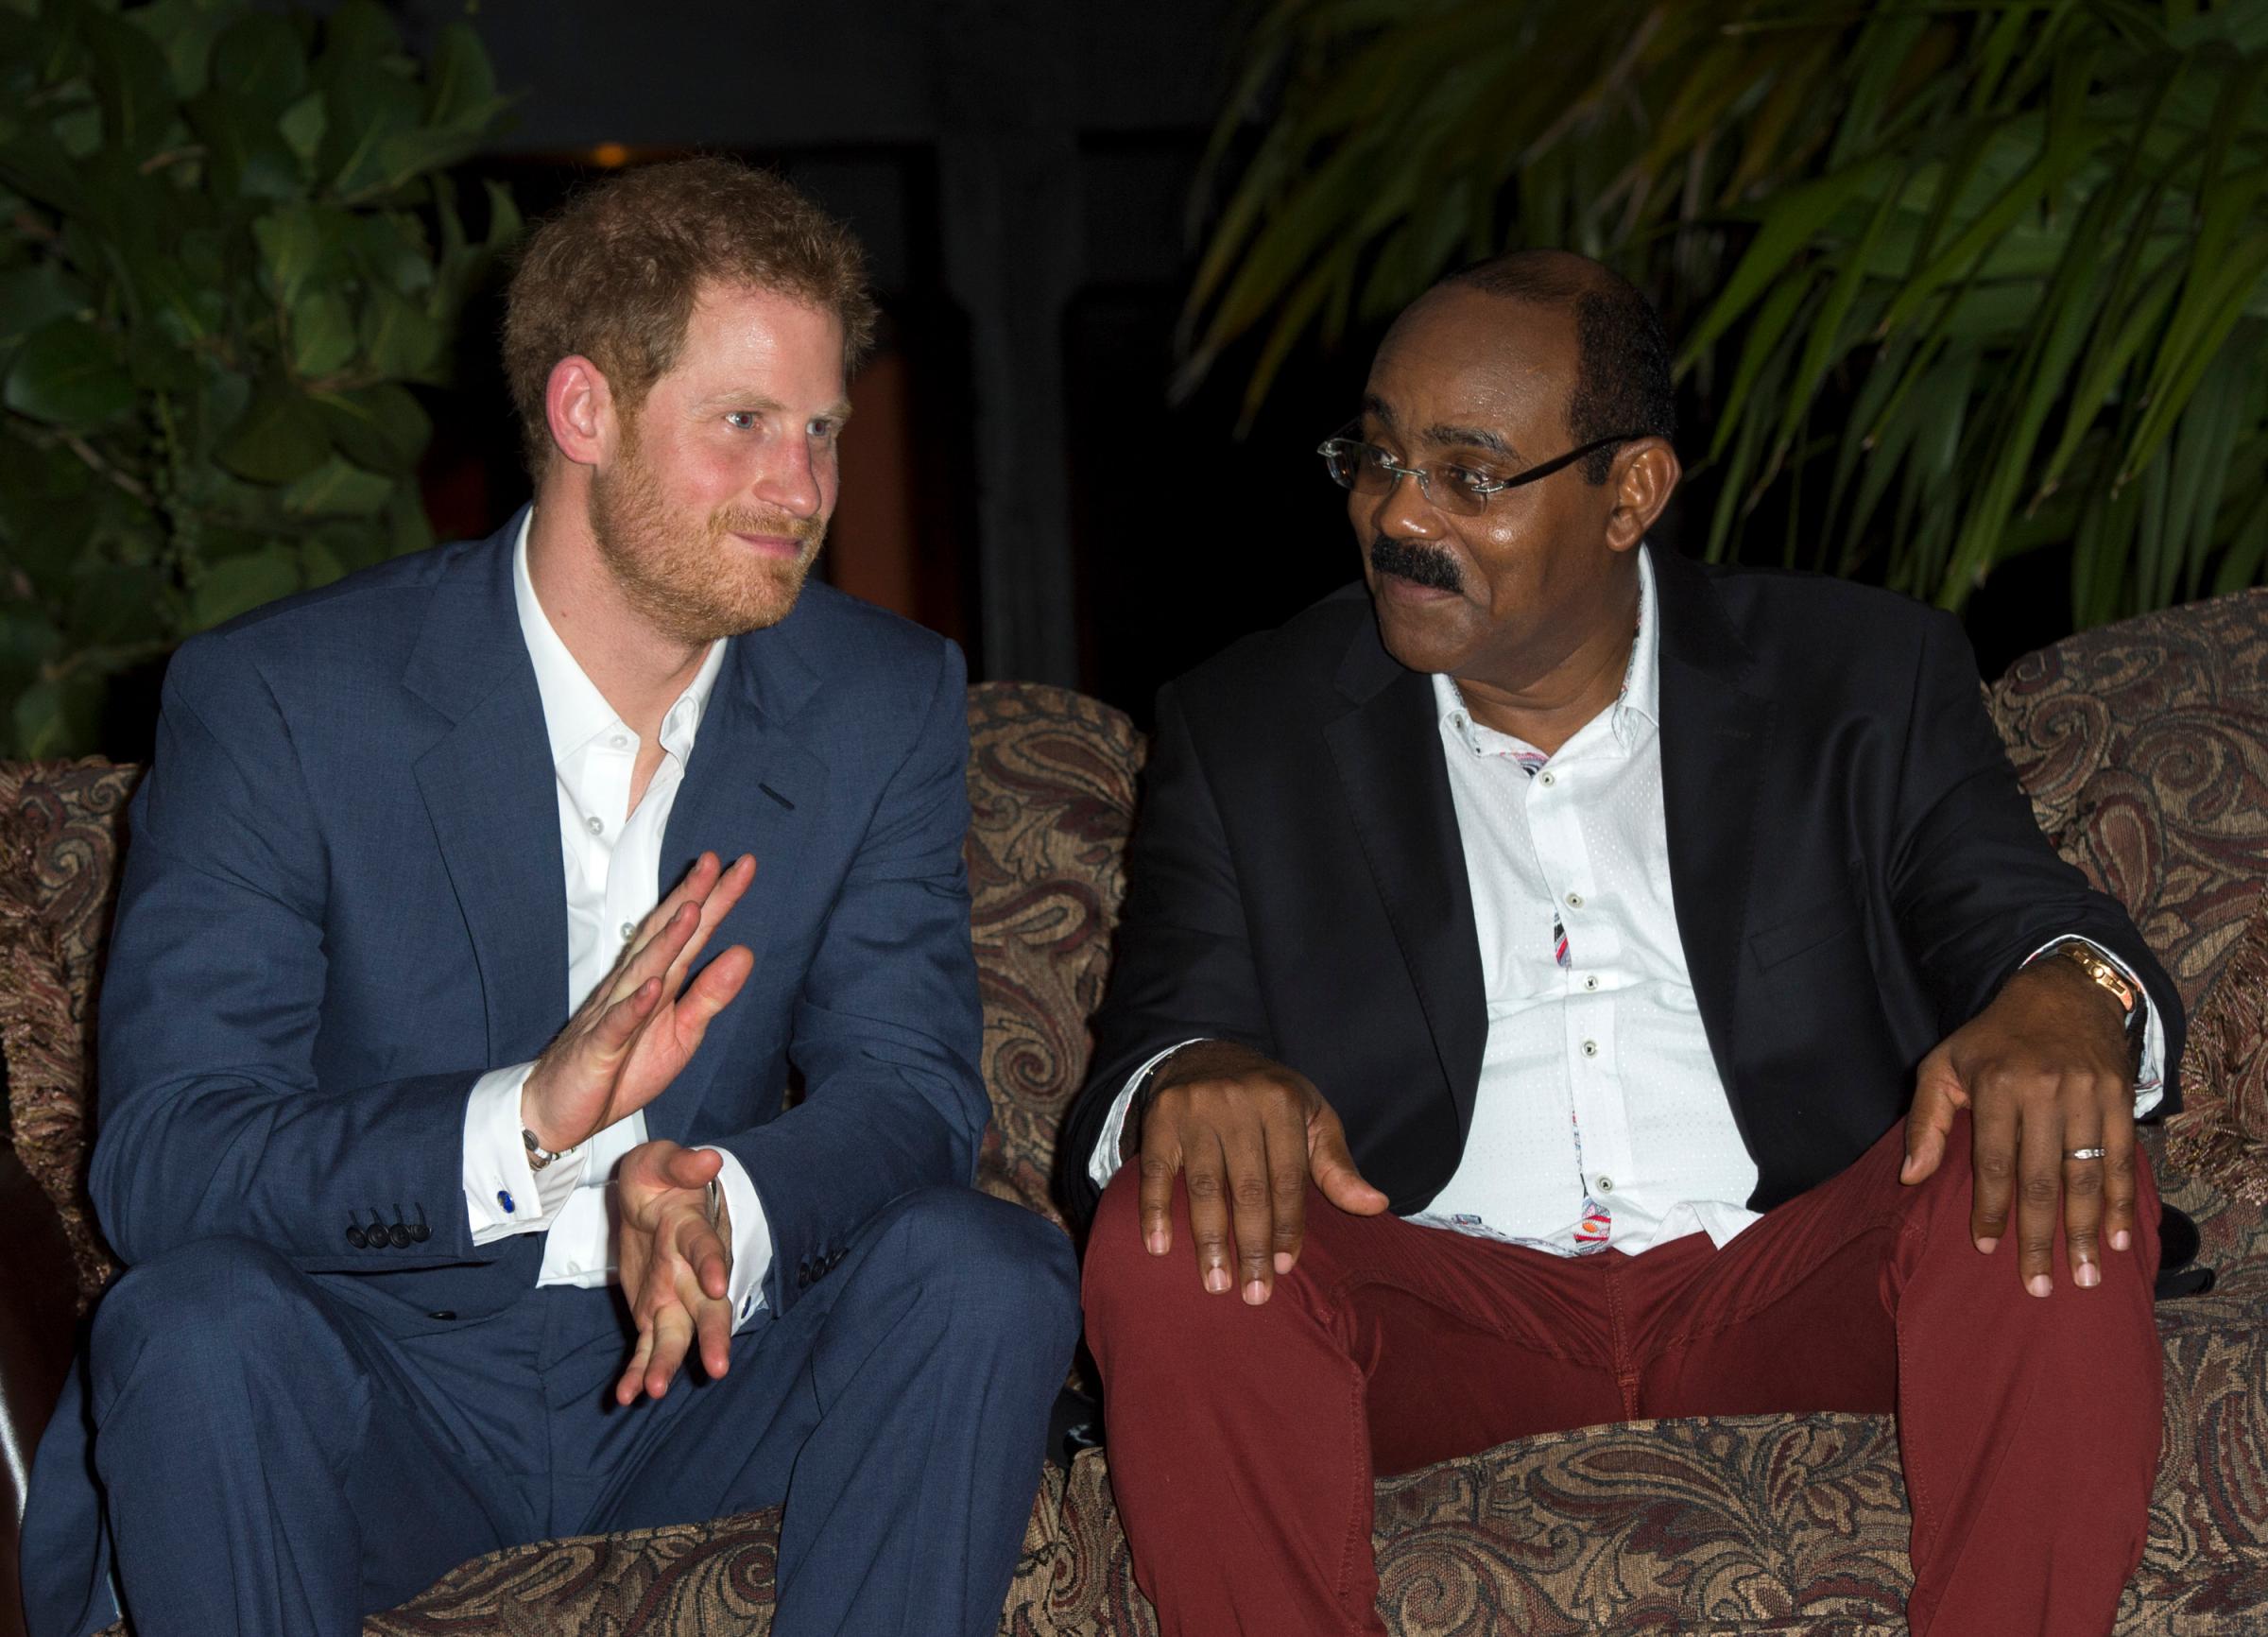 Prince Harry Visits The Caribbean - Day 2